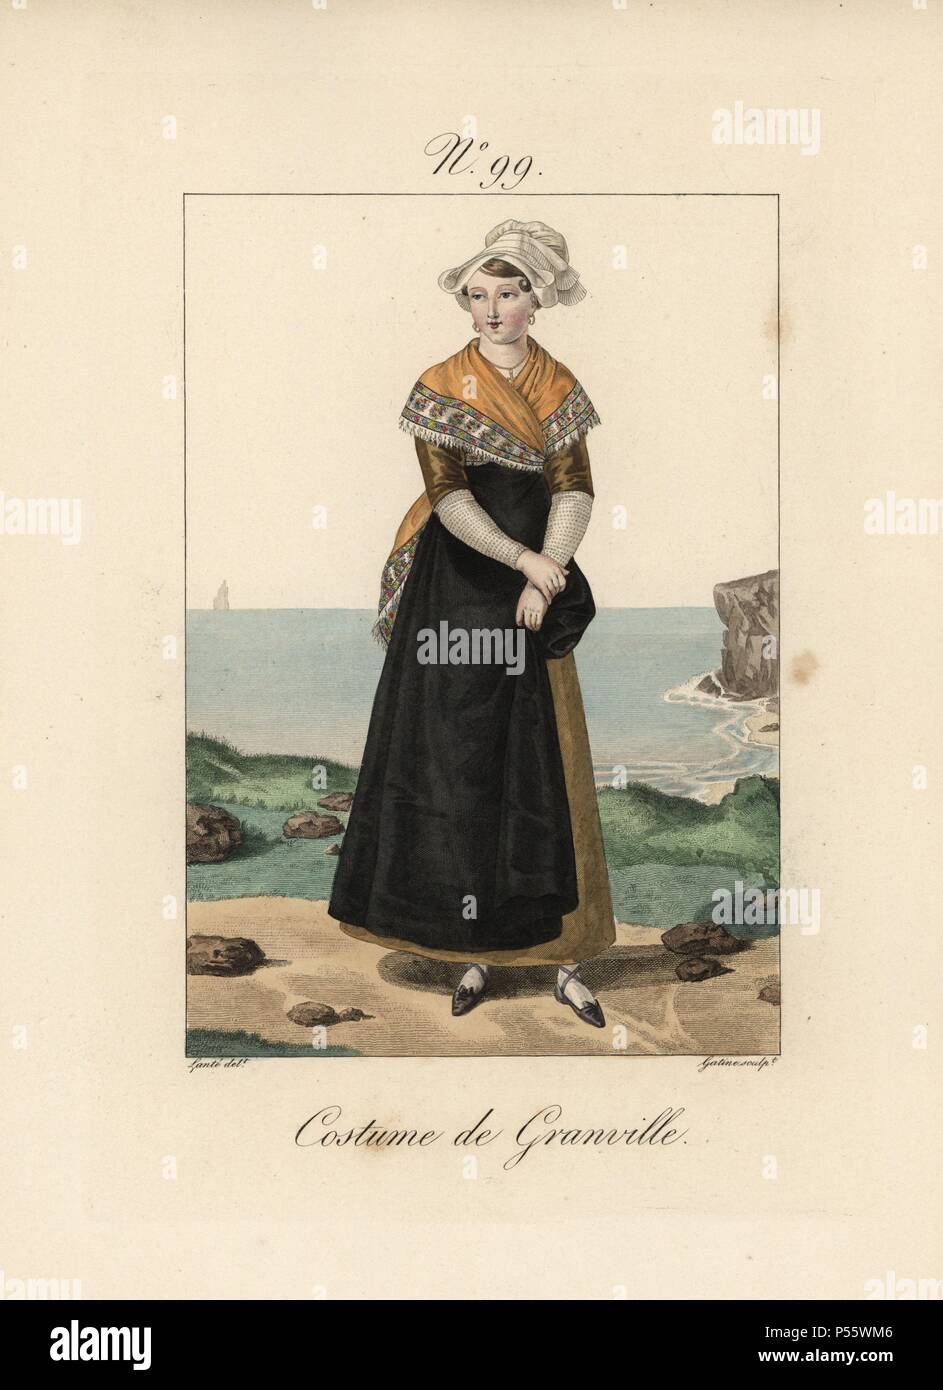 Costume of Granville. The women of Granville dress in very fine fabrics,  but never wear lace in their bonnets. This woman's bonnet tails are in  folded chiffon. Her hair at the front